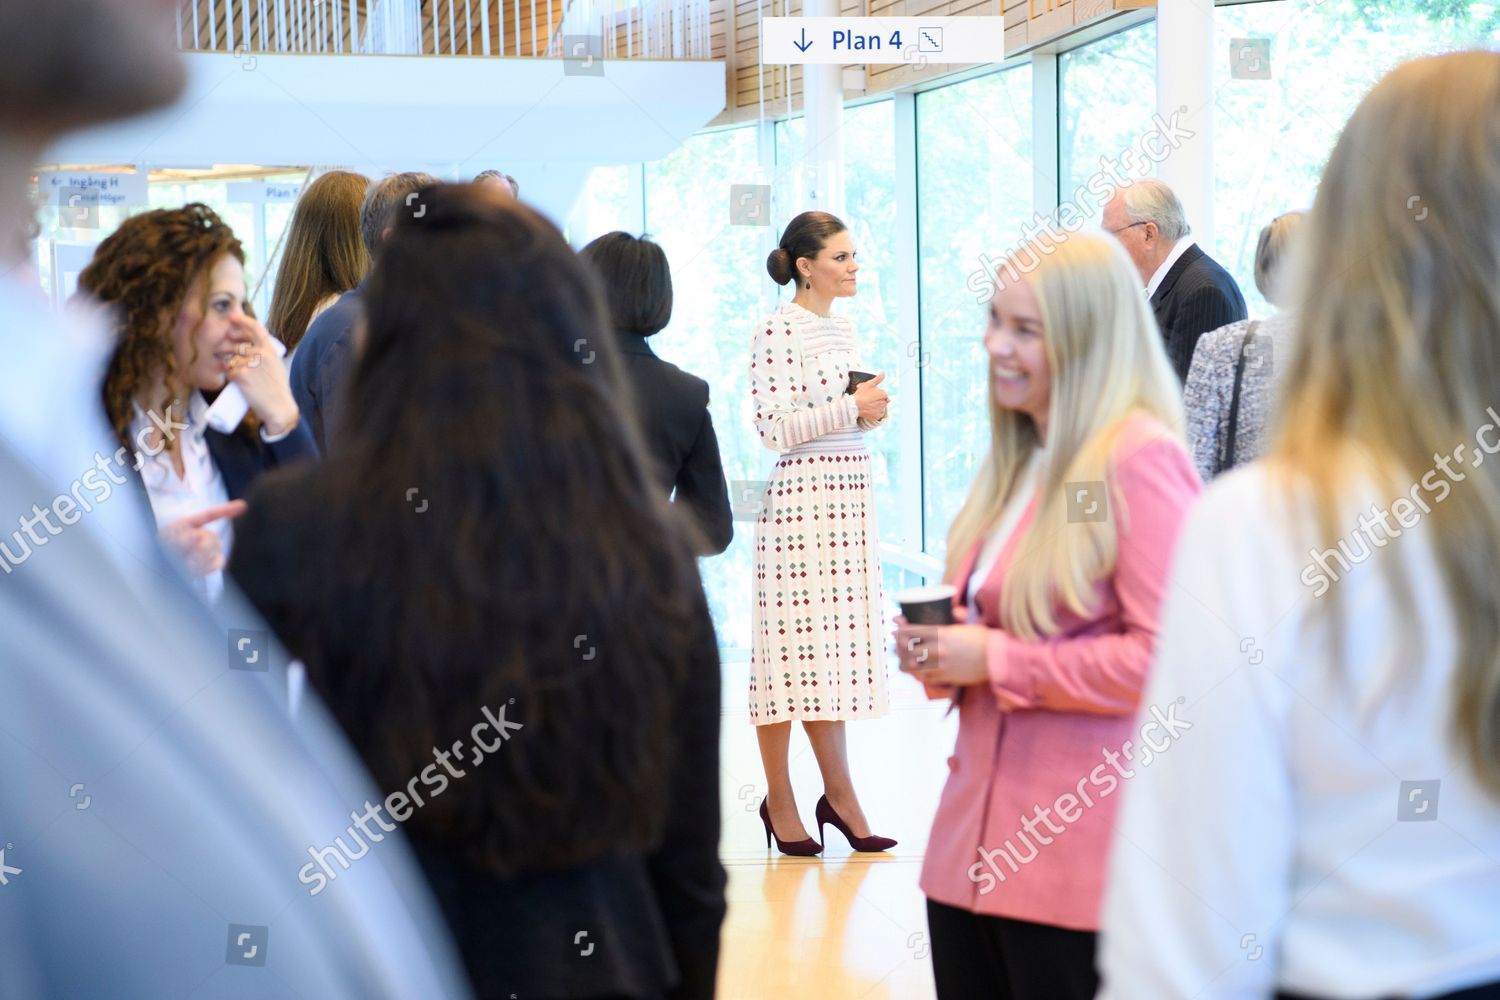 https://editorial01.shutterstock.com/wm-preview-1500/12436278m/5235901a/crown-princess-victoria-attends-esil-conference-at-stockholm-university-stockholm-sweden-shutterstock-editorial-12436278m.jpg